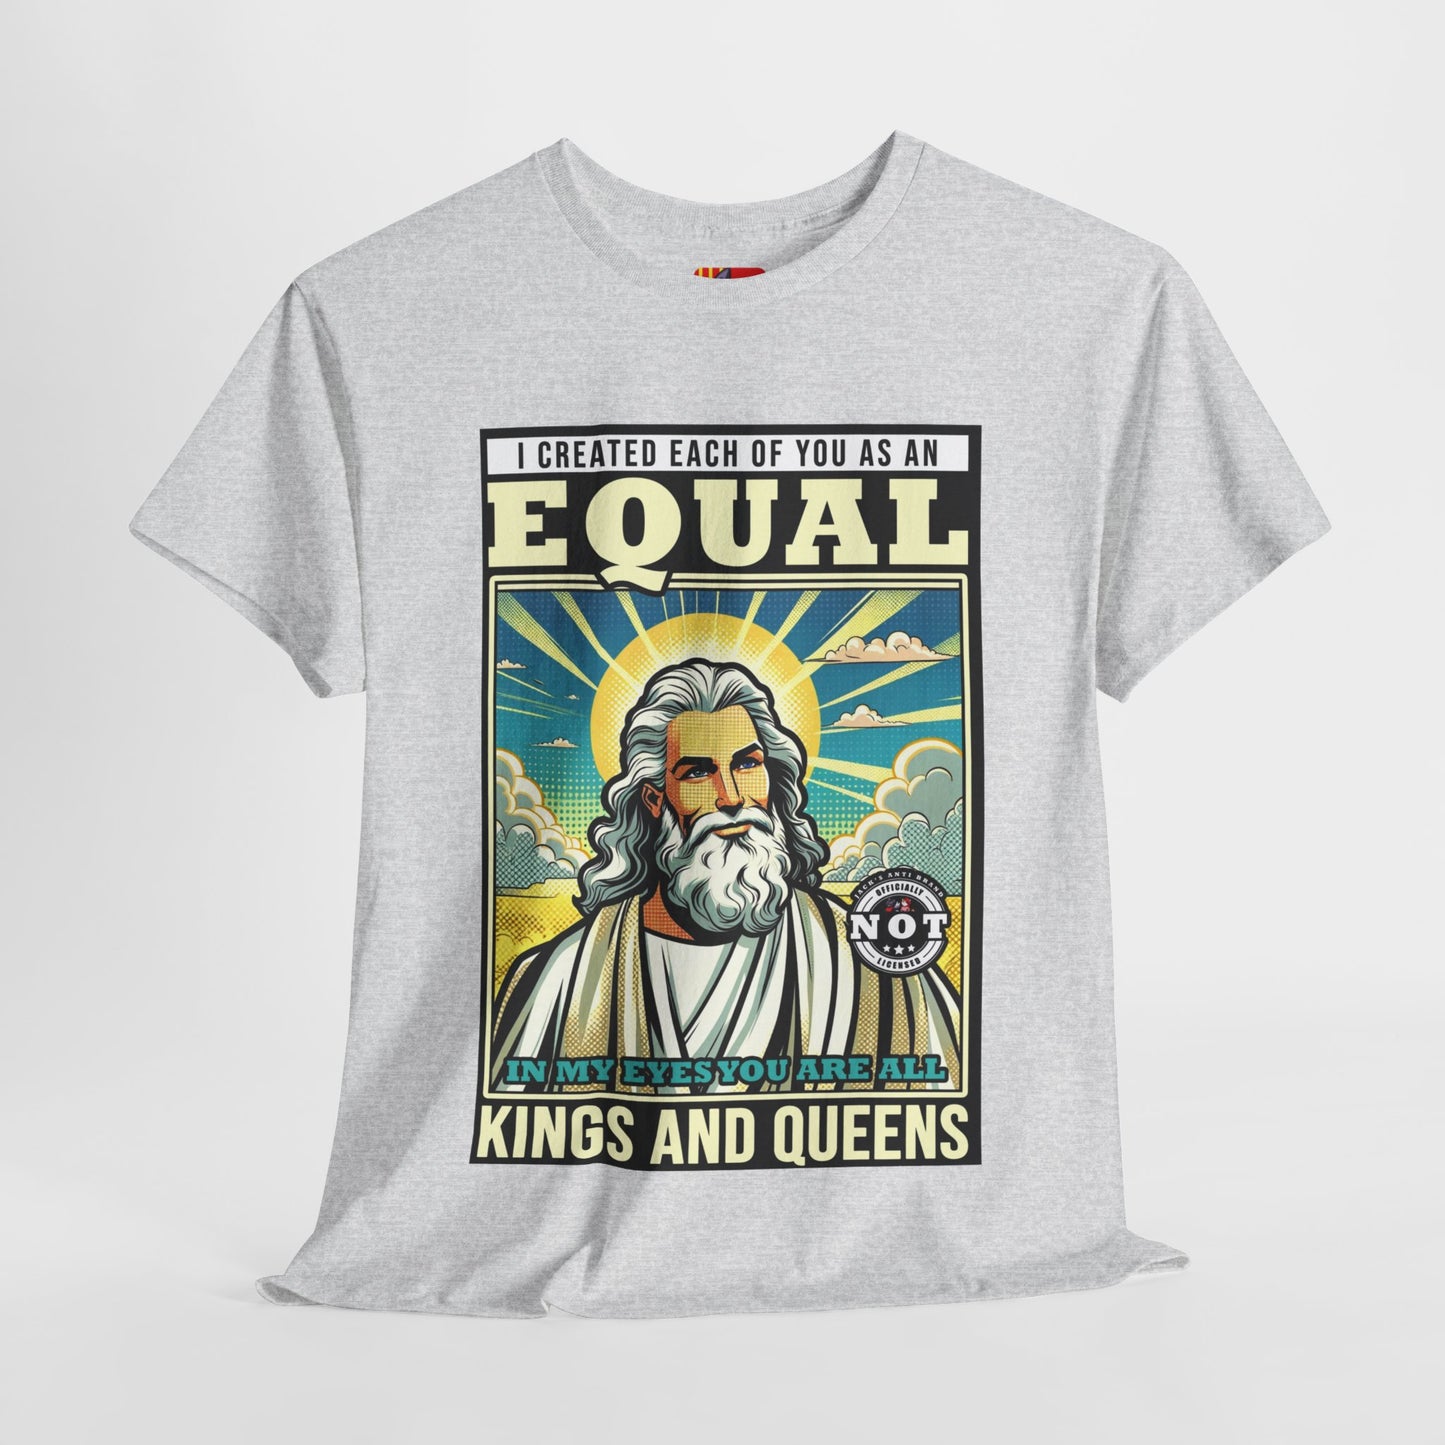 The Free Speech Advocate T-Shirt: I created each of as an equal in my eyes